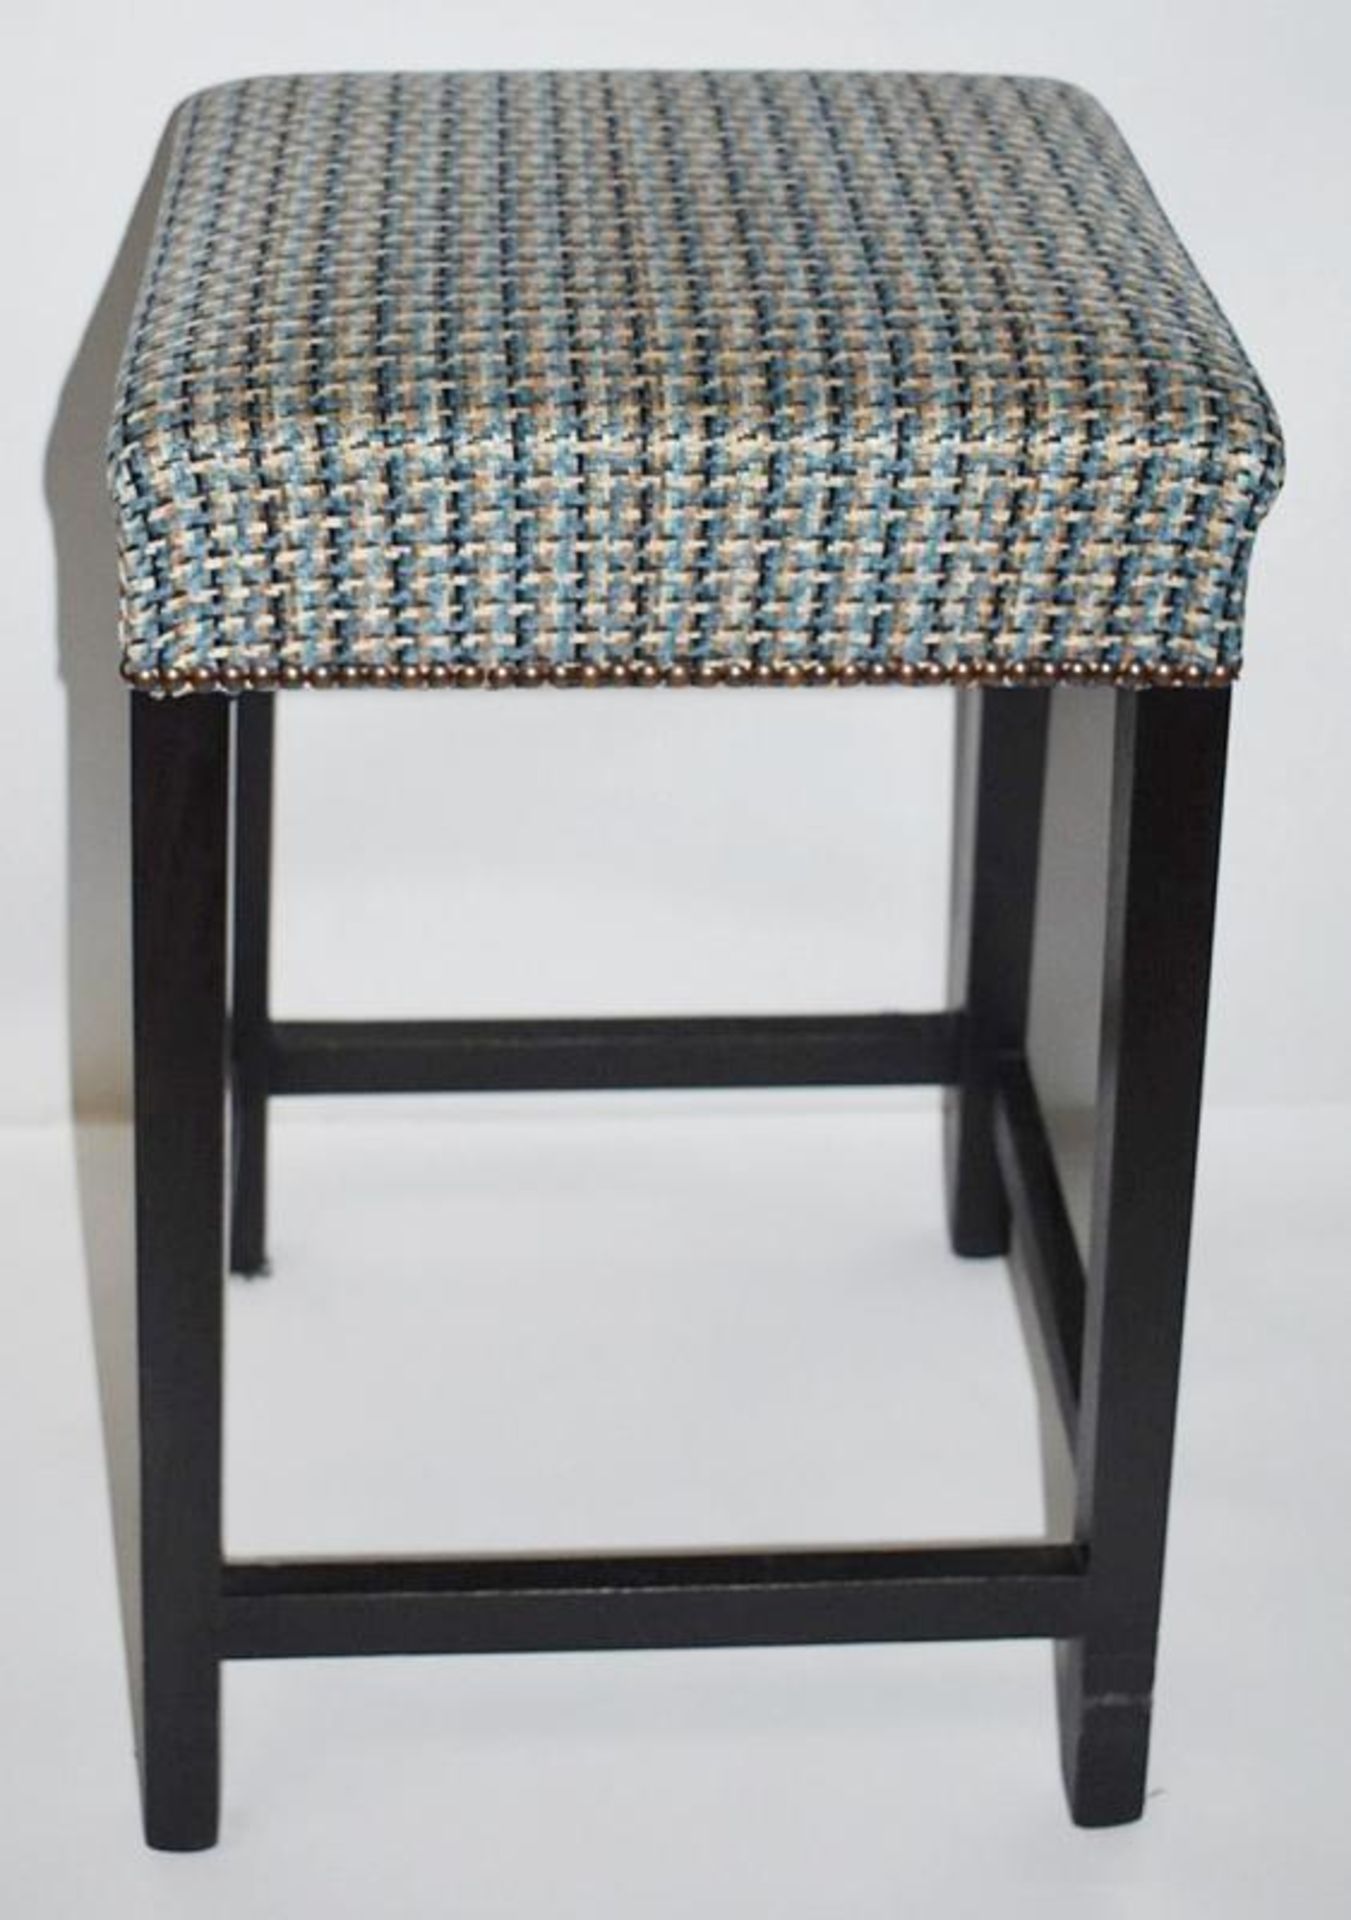 1 x Contemporary Bar Stool Upholstered In A Chic Designer Fabric - Recently Removed From A Famous De - Image 7 of 7